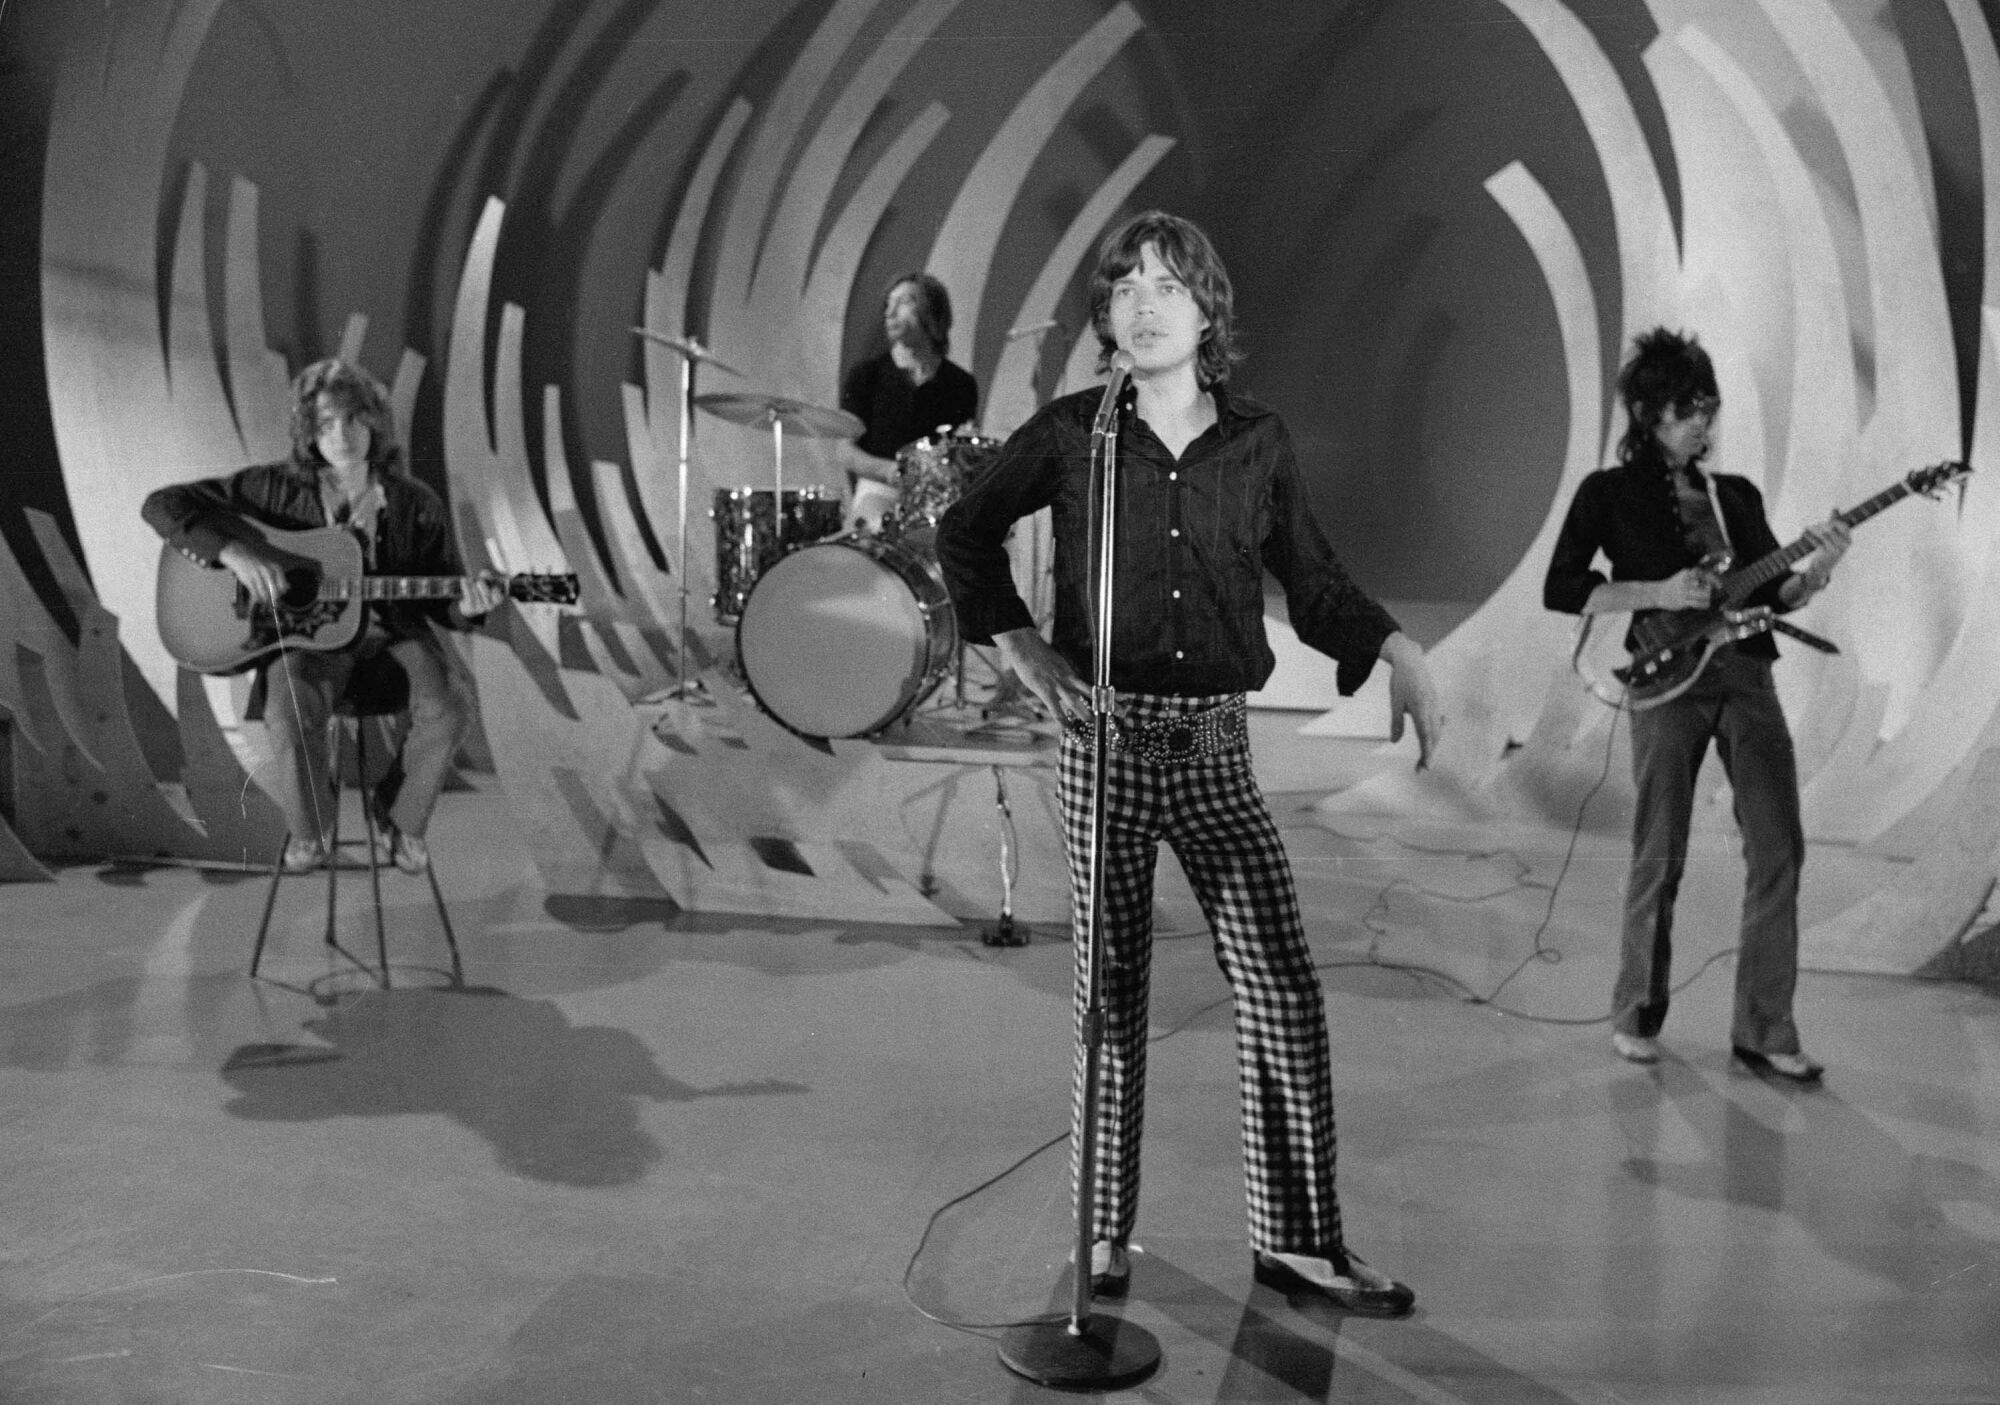 The Rolling Stones rehearse onstage for an appearance on "The Ed Sullivan Show" in 1969.